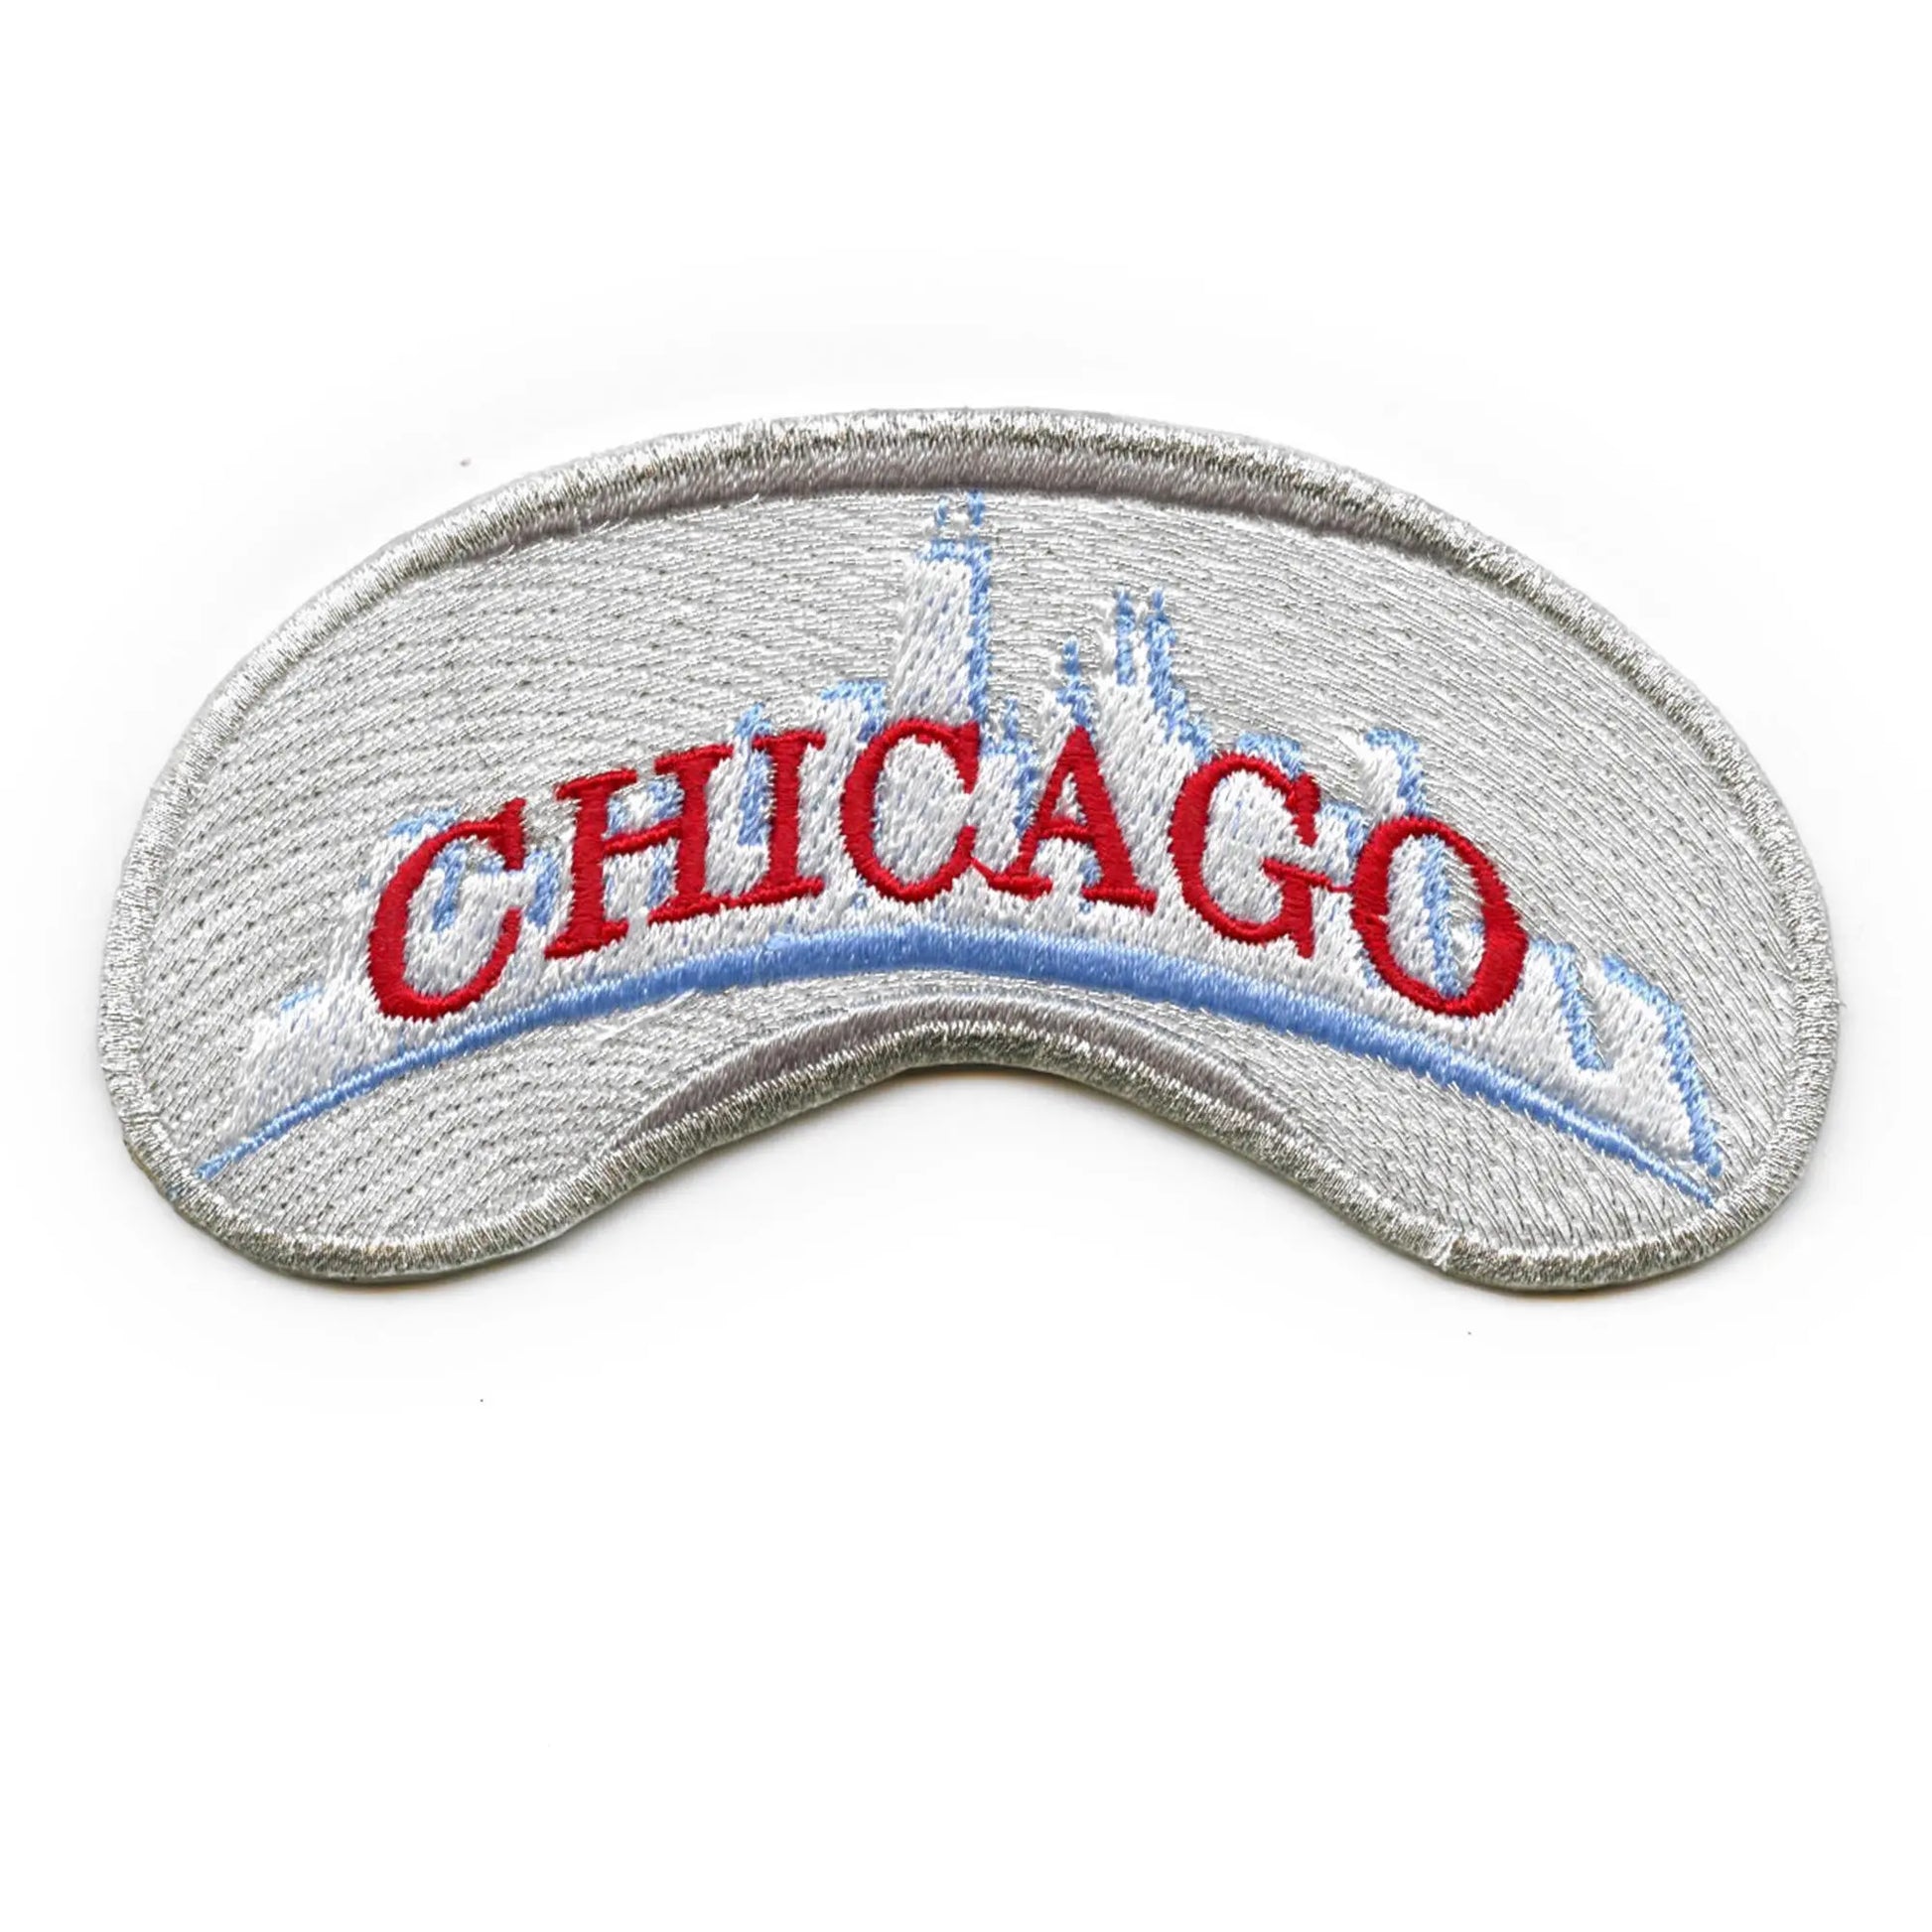 Chicago Cloud Gate Skyline Patch Illinois Downtown City Embroidered Iron On